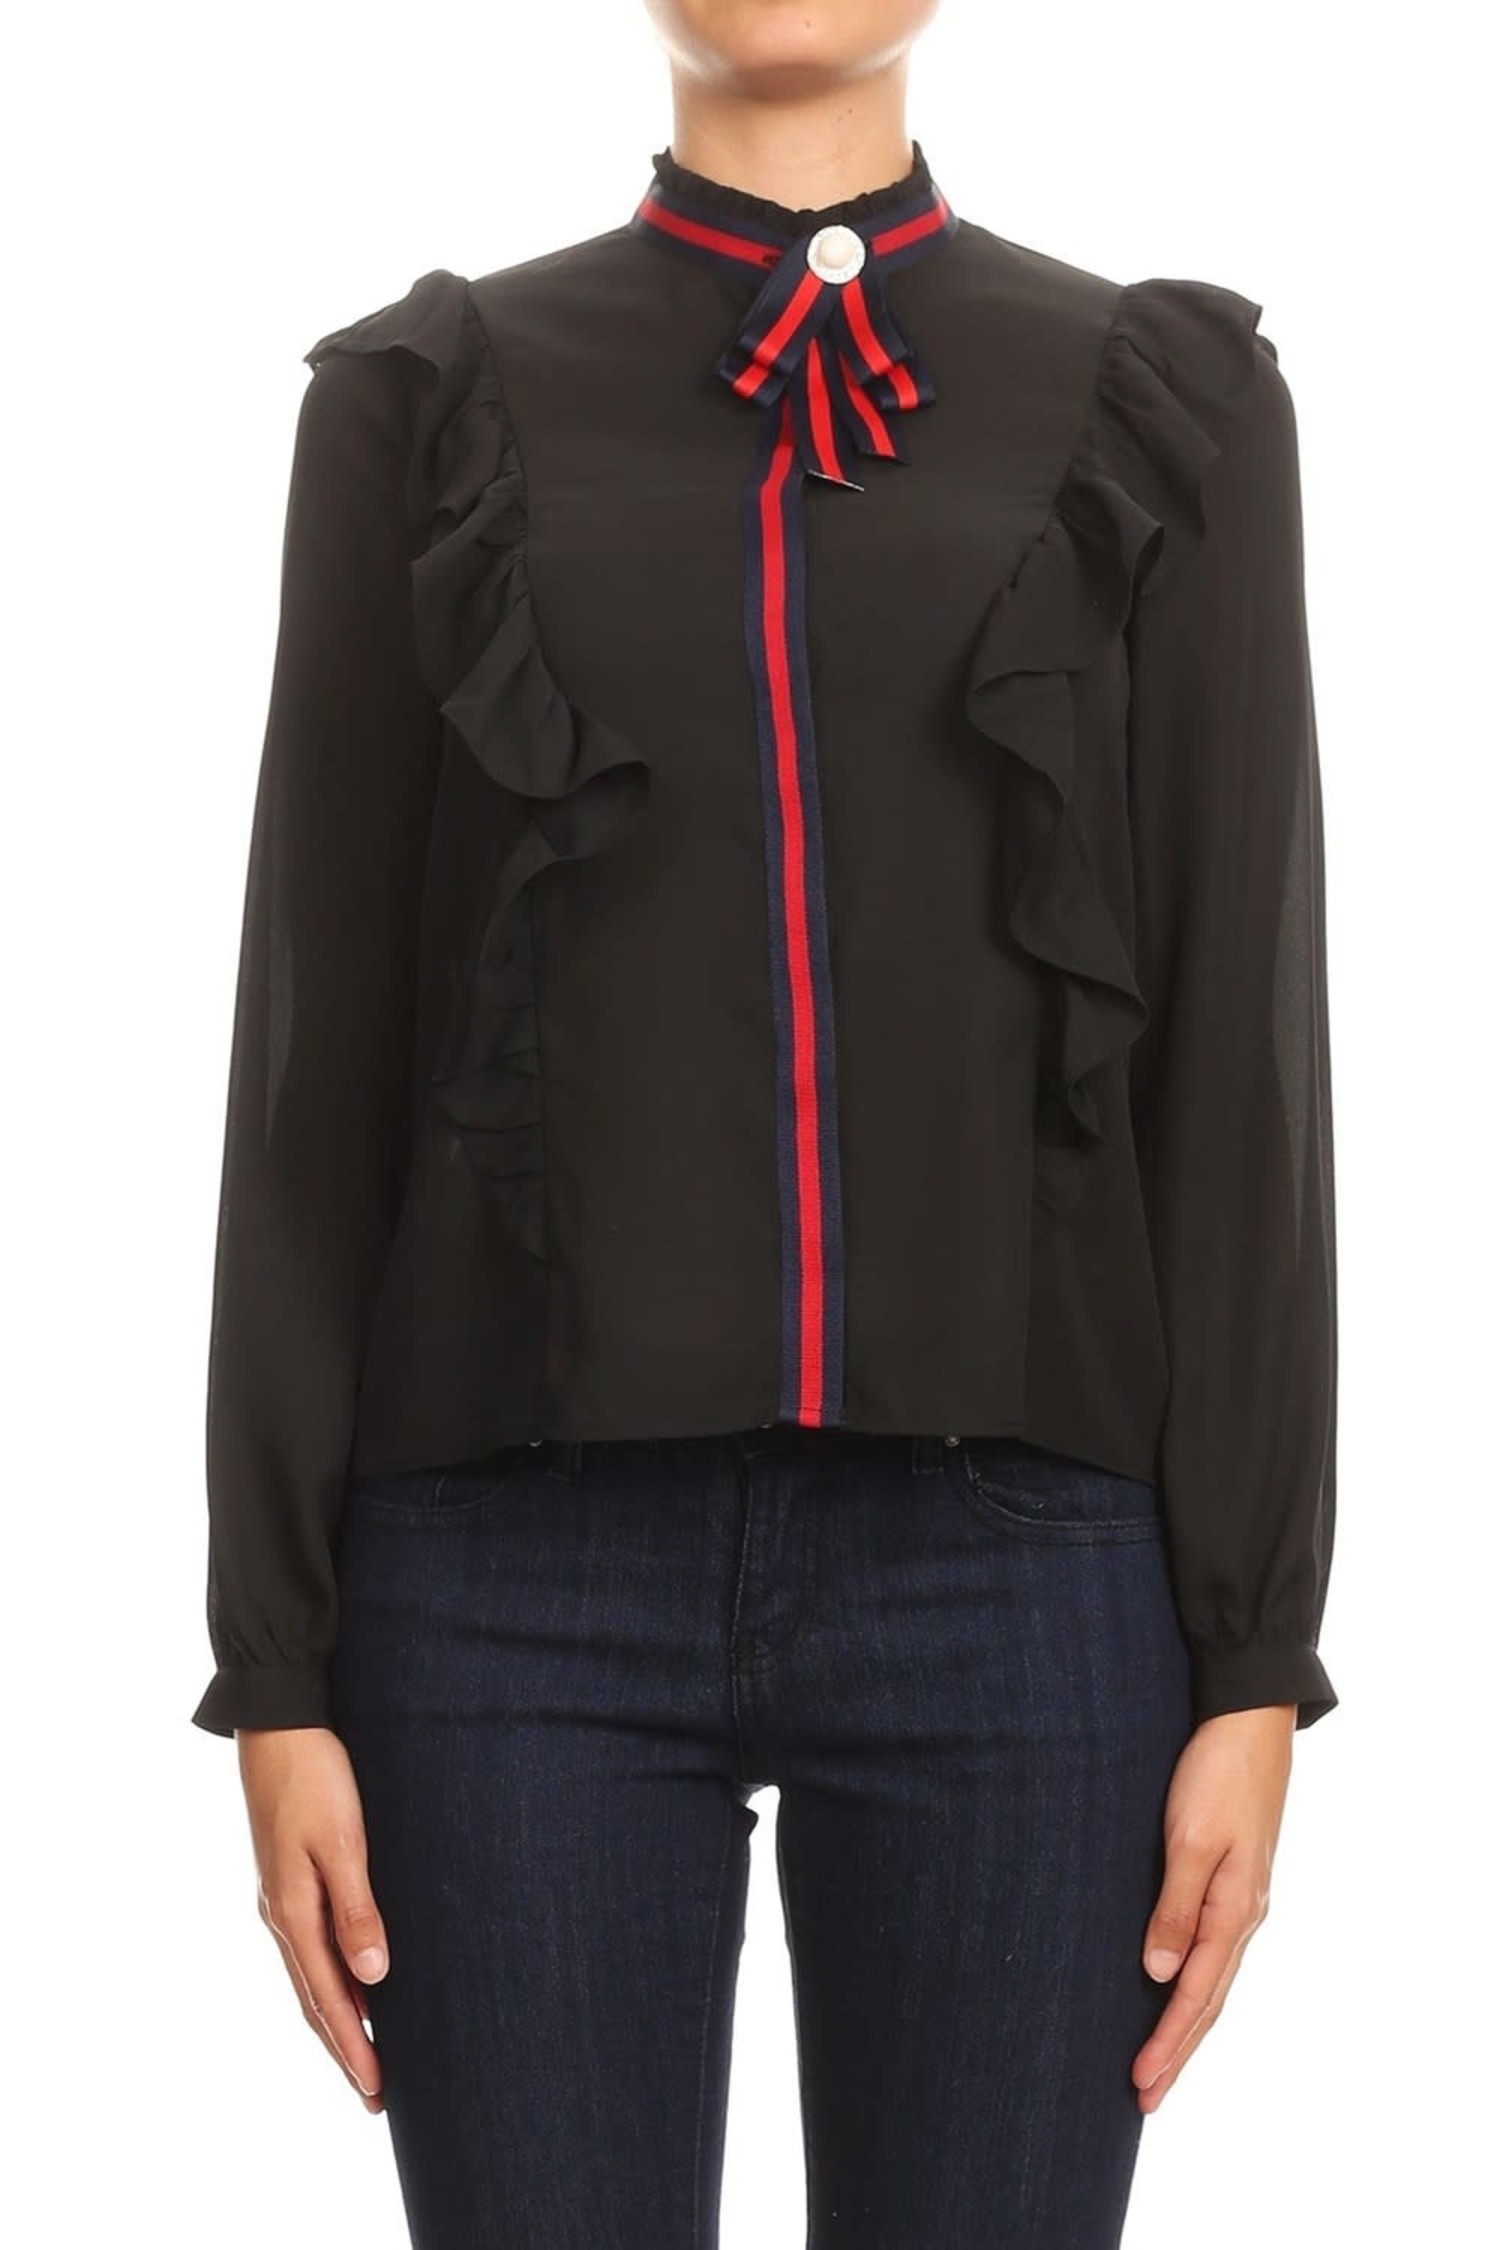 gucci inspired ruffle blouse